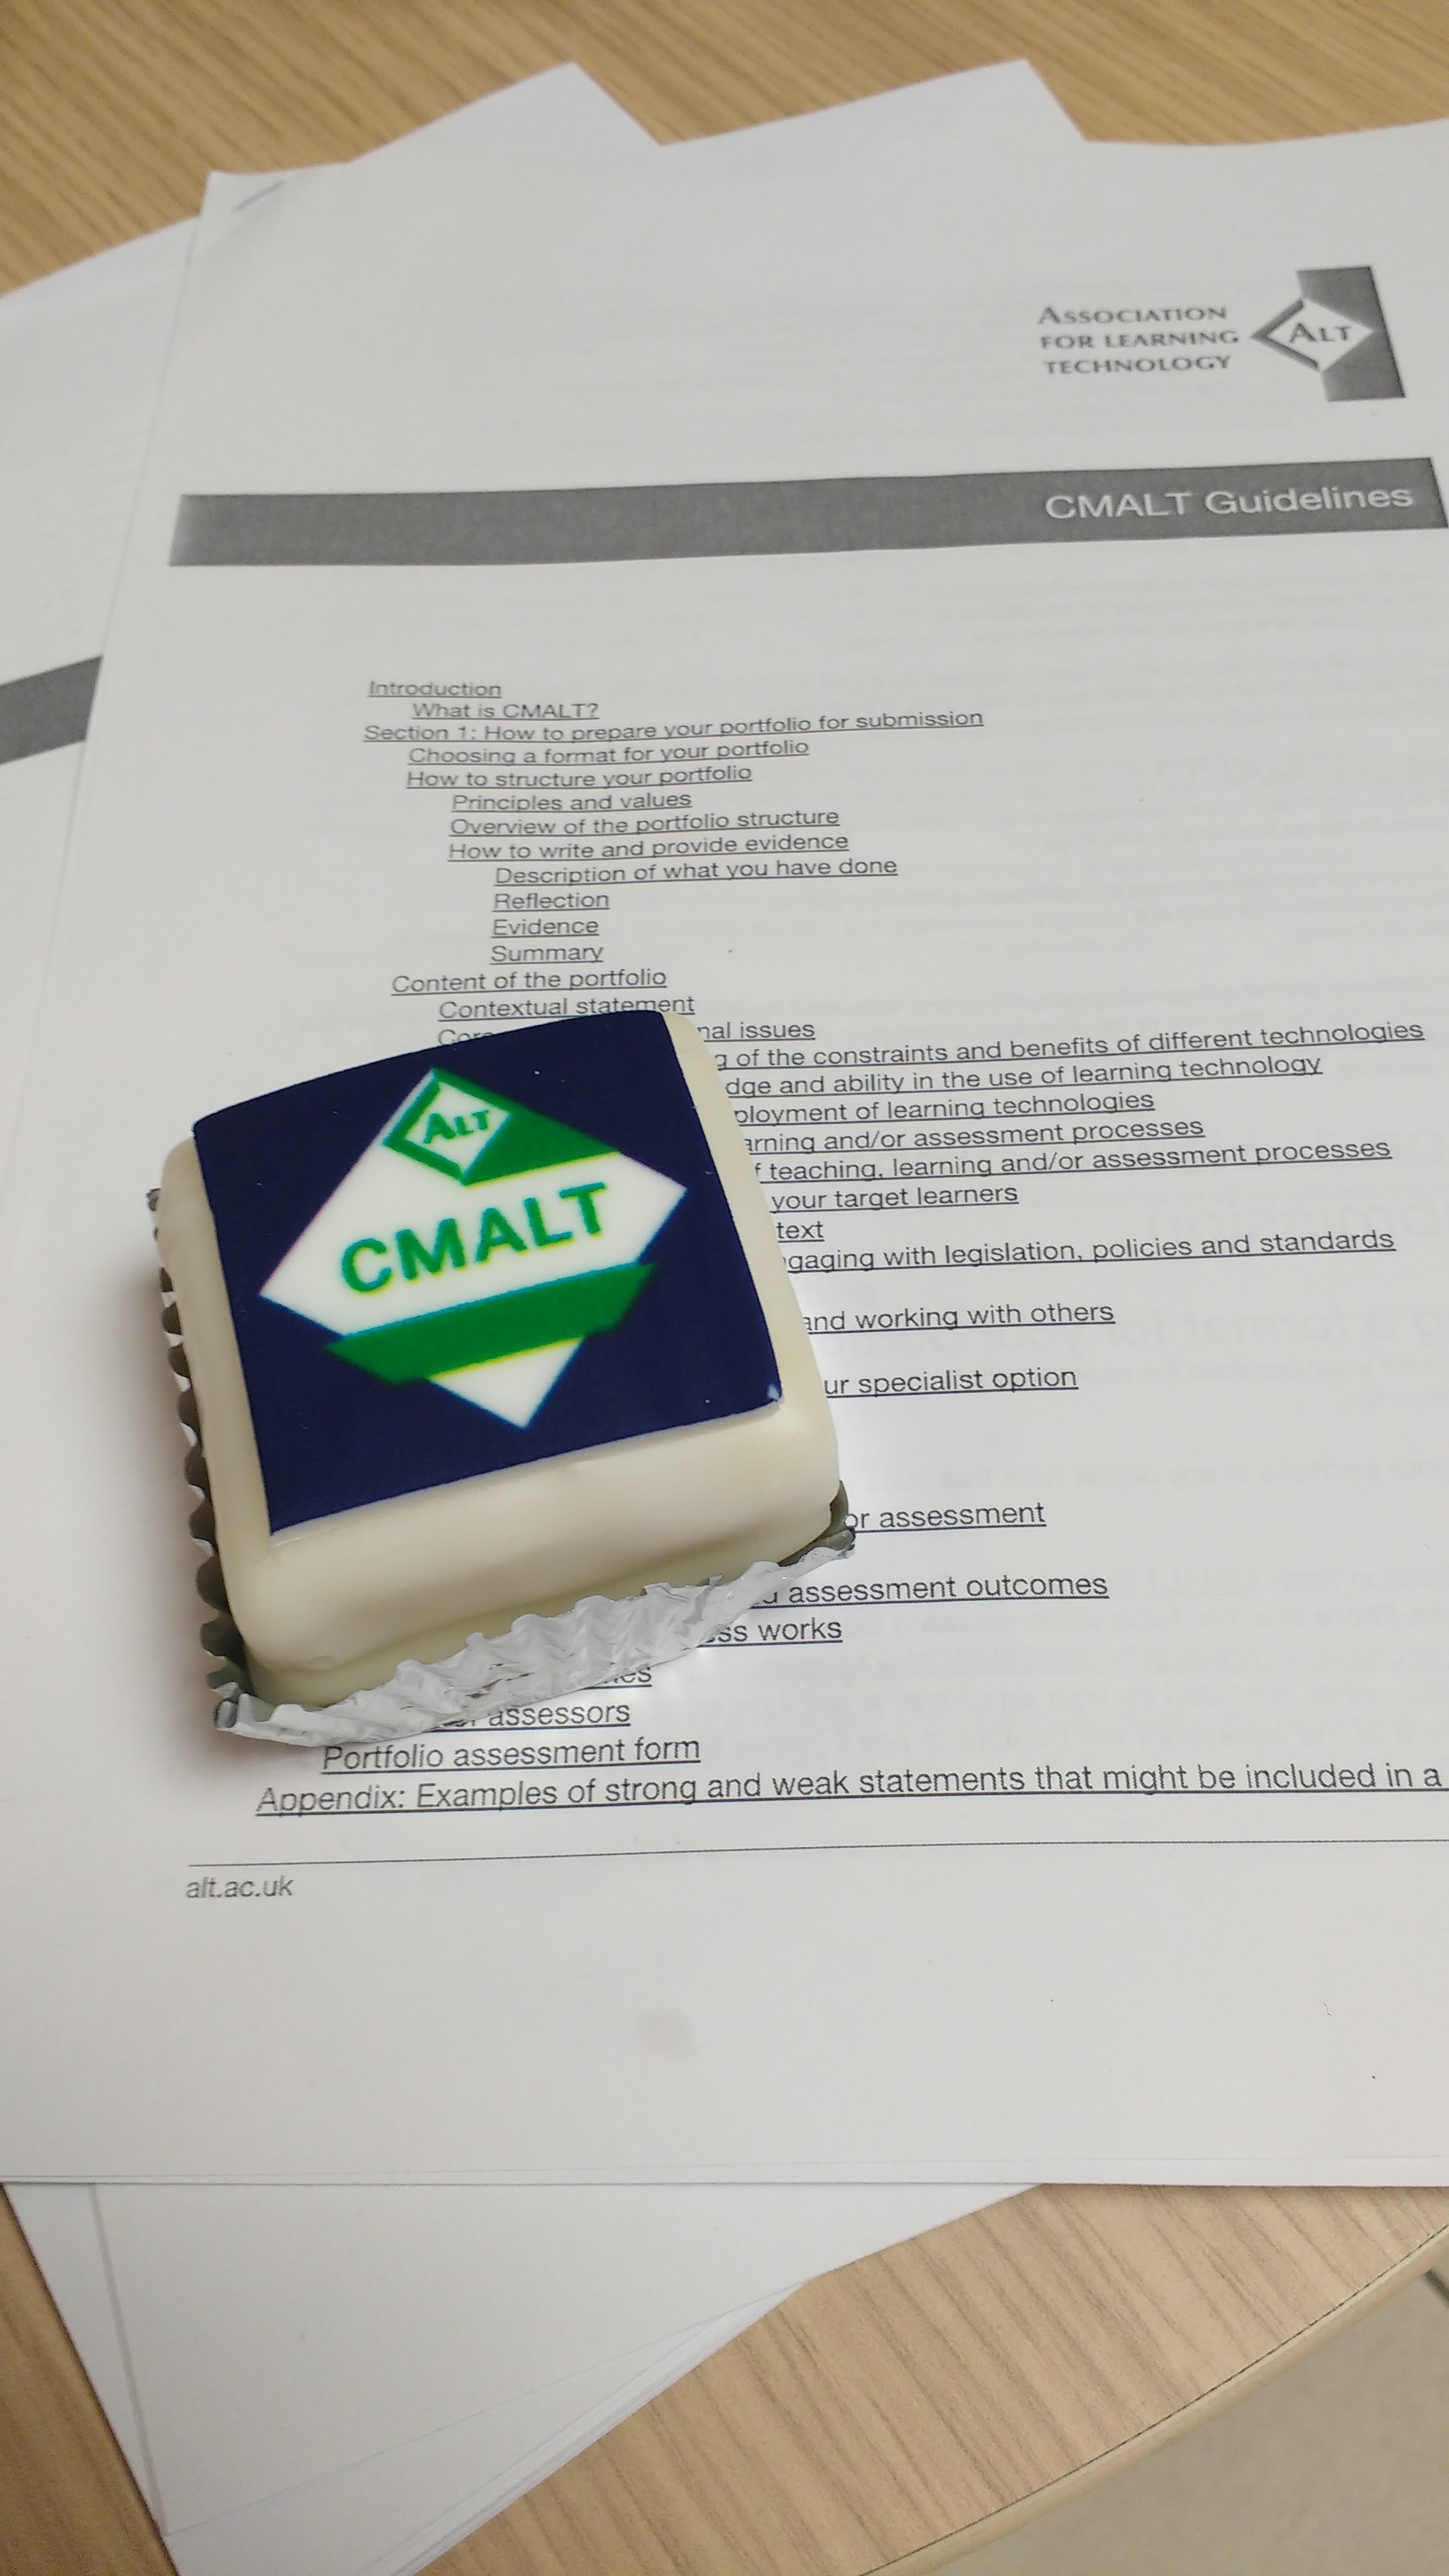 A photograph of the CMALT guideline documents and a cake with the CMALT logo